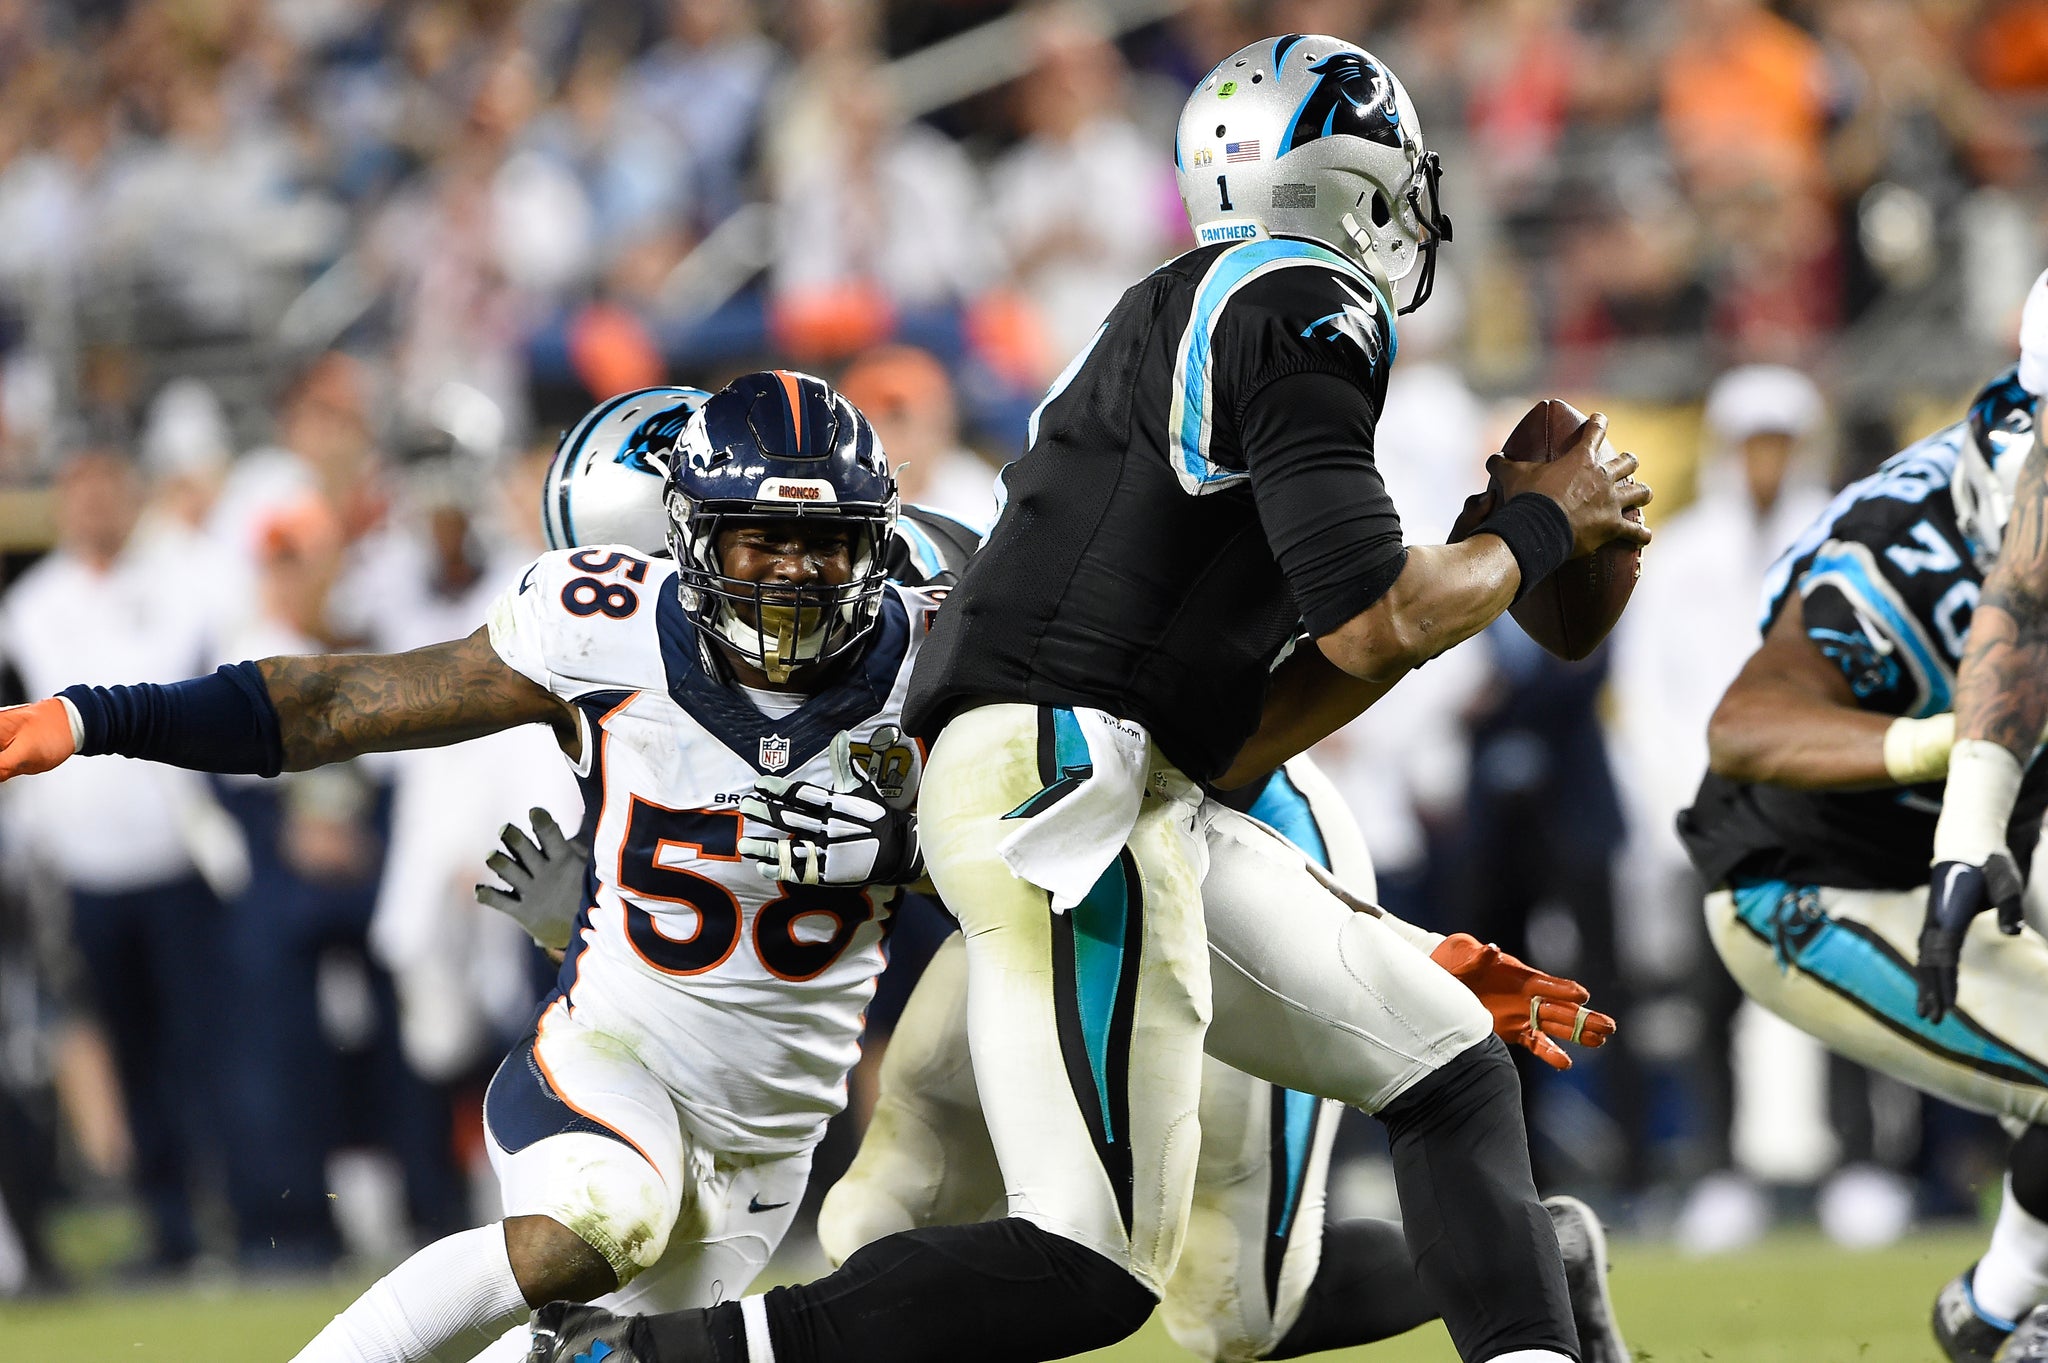 Von Miller (58) of the Denver Broncos sets his sights on Cam Newton (1) of the Carolina Panthers in the fourth quarter of Super Bowl 50.  -- Photo by Joe Amon/The Denver Post